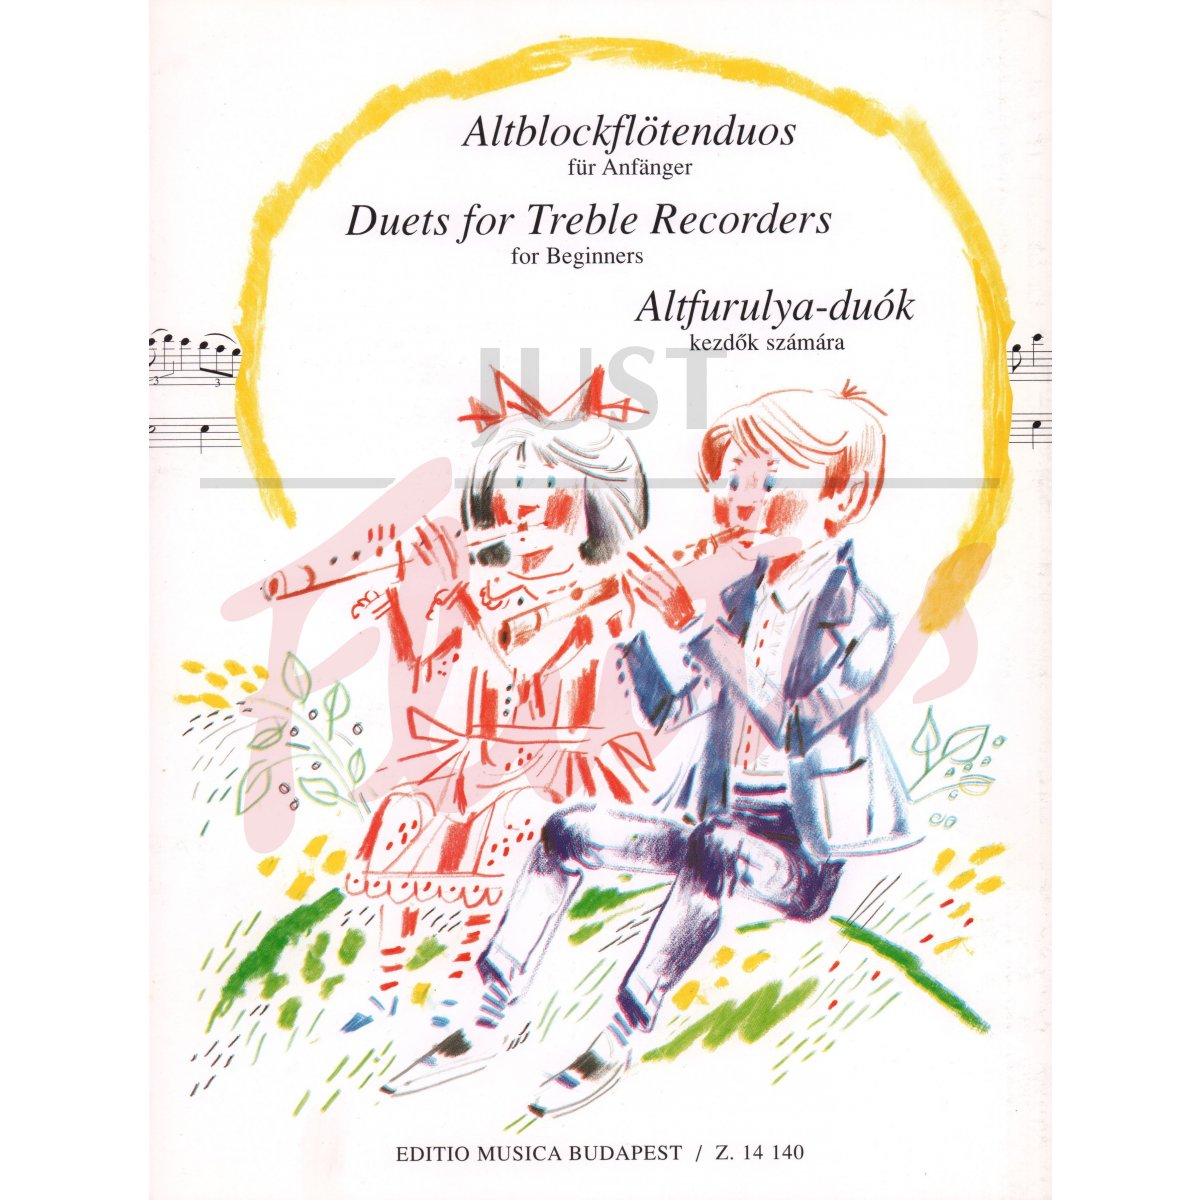 Duets for Treble Recorders for Beginners